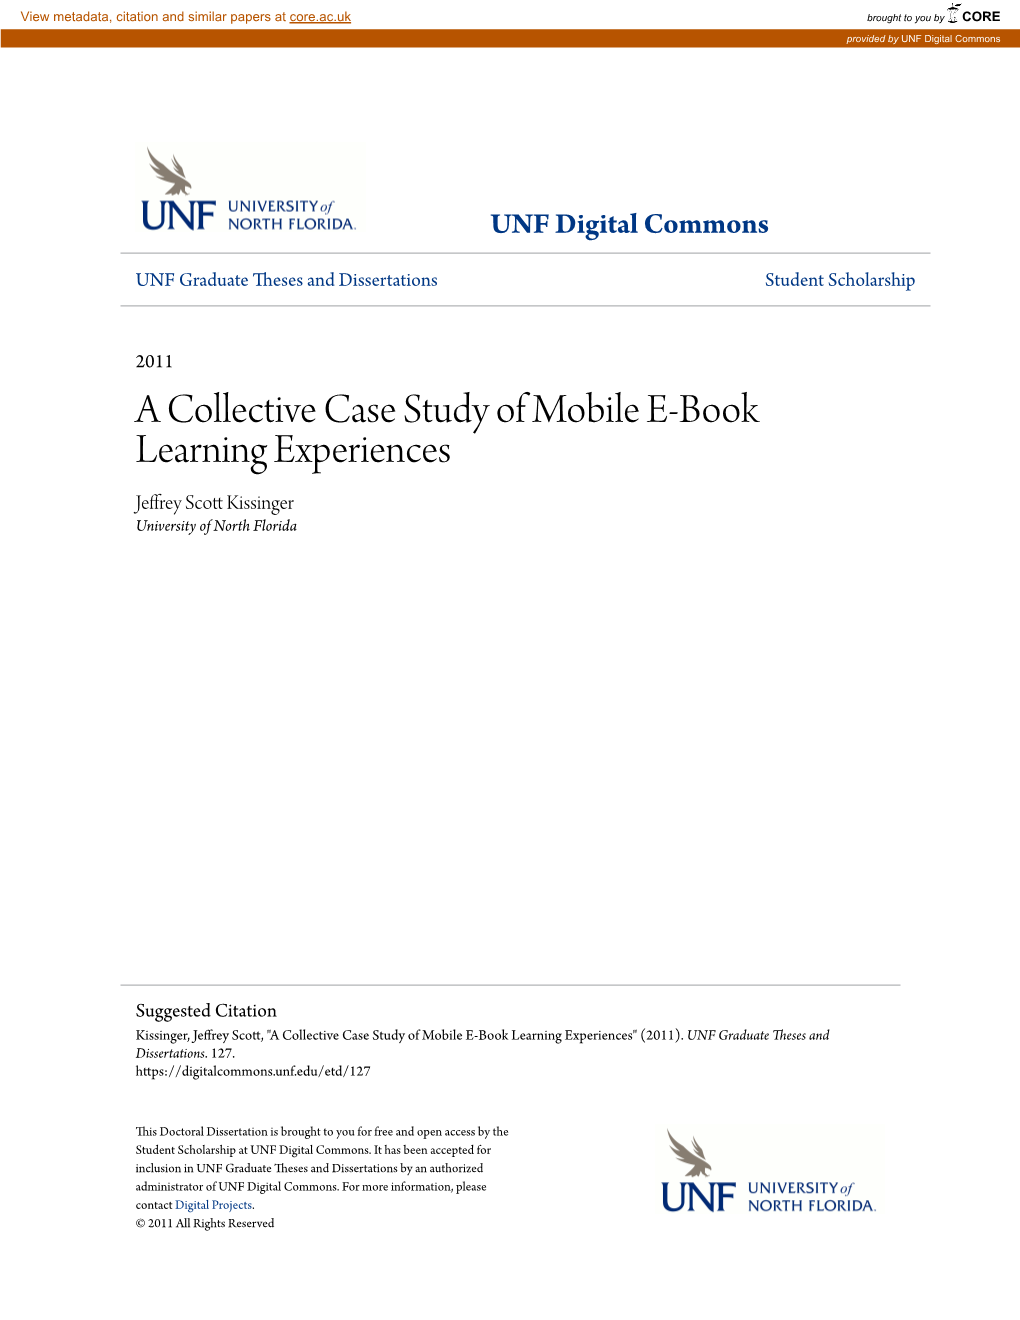 A Collective Case Study of Mobile E-Book Learning Experiences Jeffrey Scott Kissinger University of North Florida